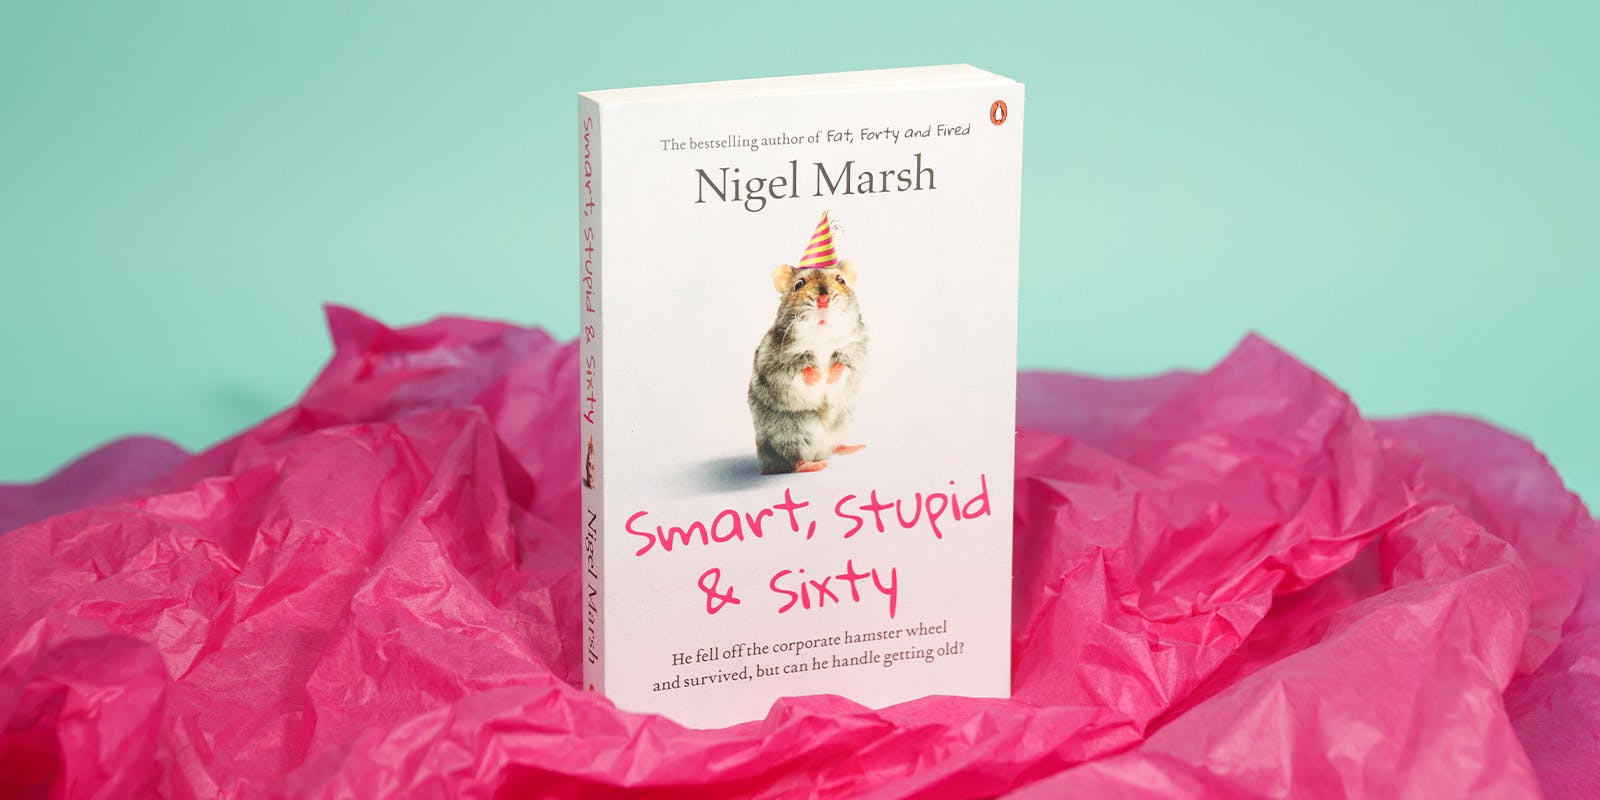 If you liked his TED talk, you'll love Nigel Marsh's new book